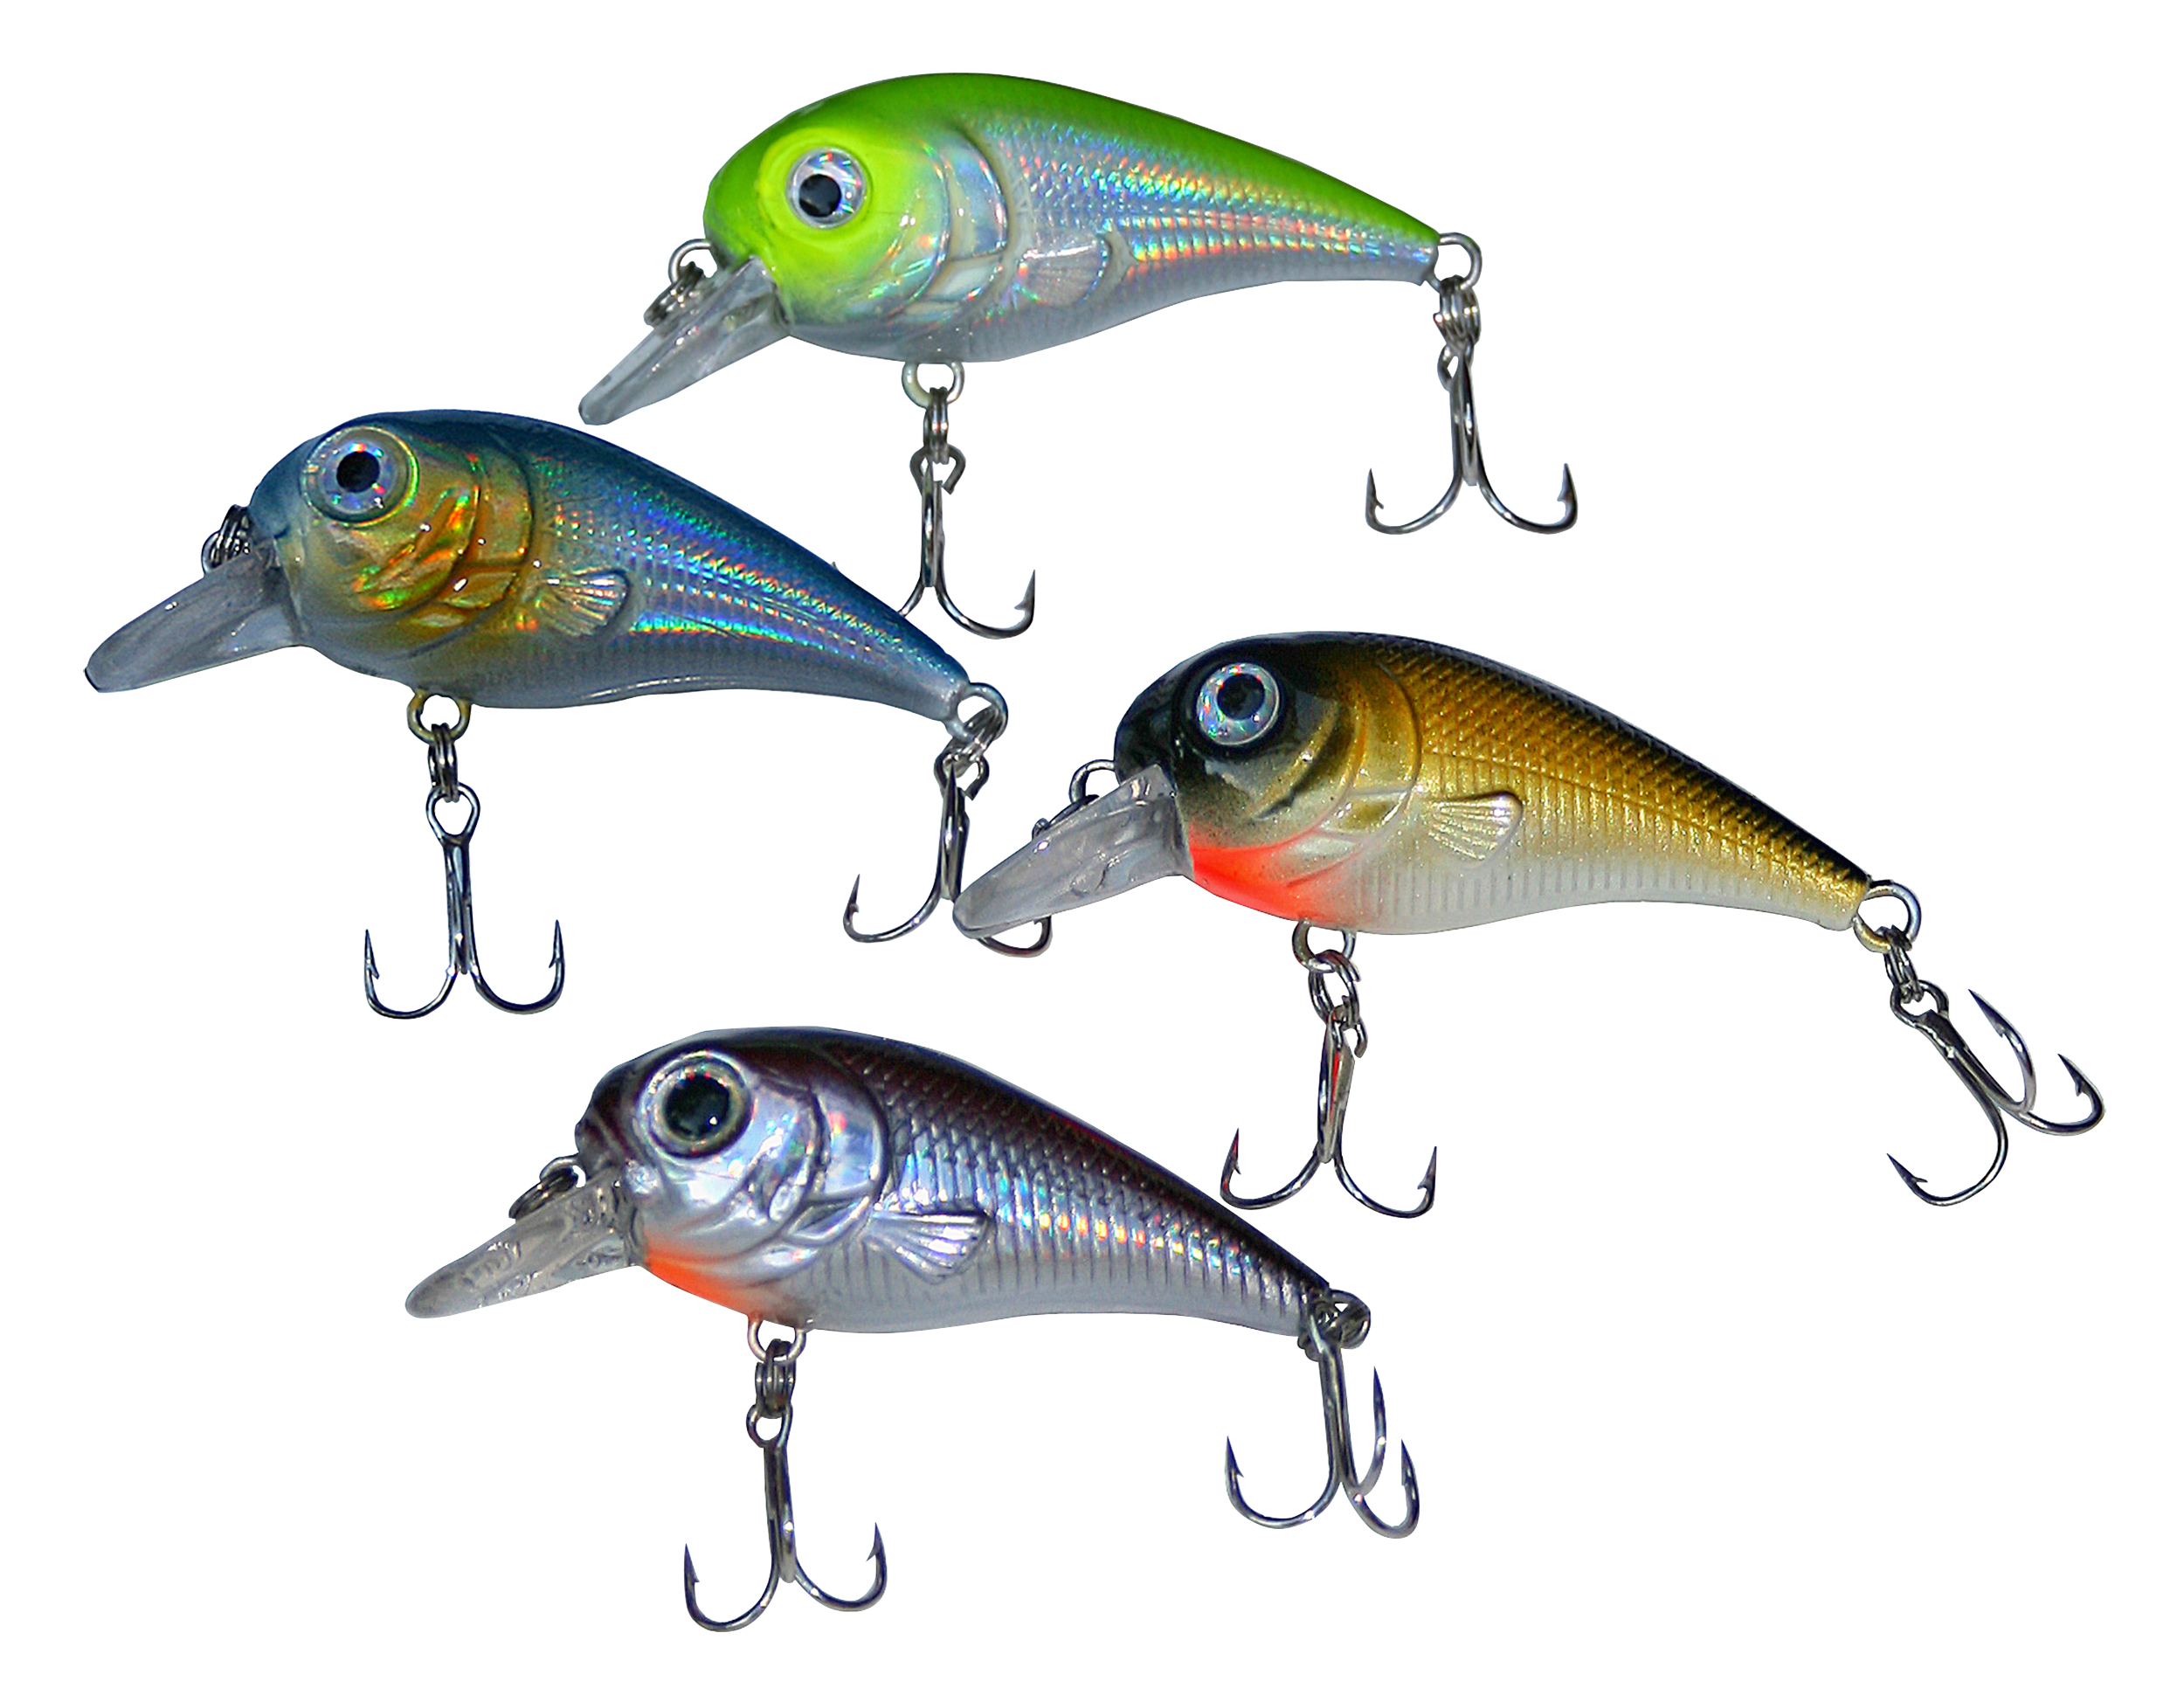 Bass Pro Shops XPS Shallow Suspending Shad 6-Pack